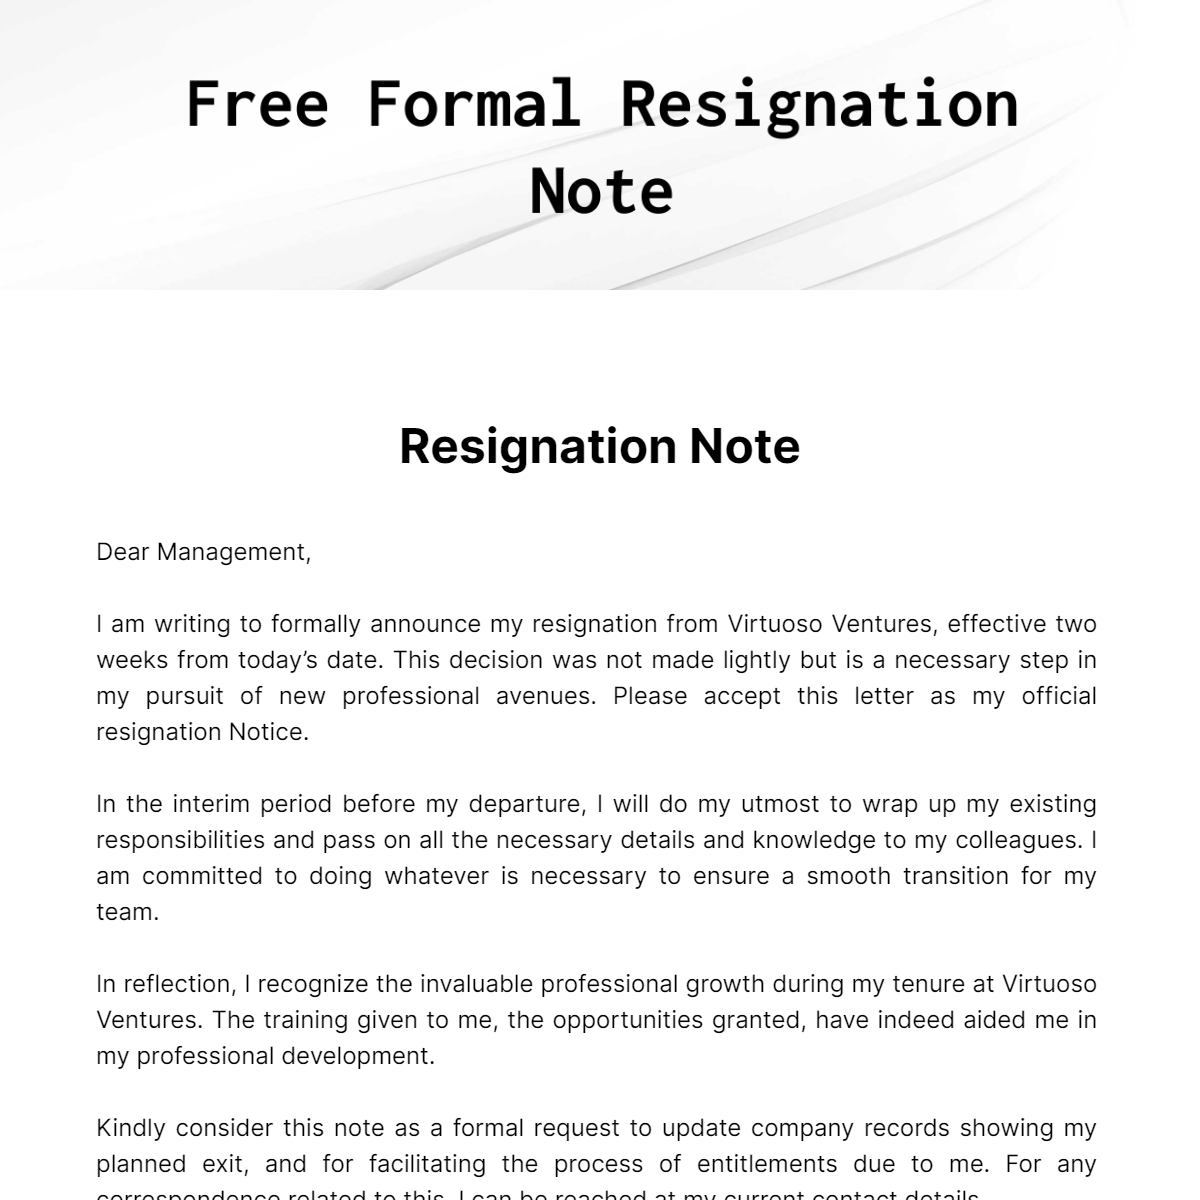 Formal Resignation Note Template